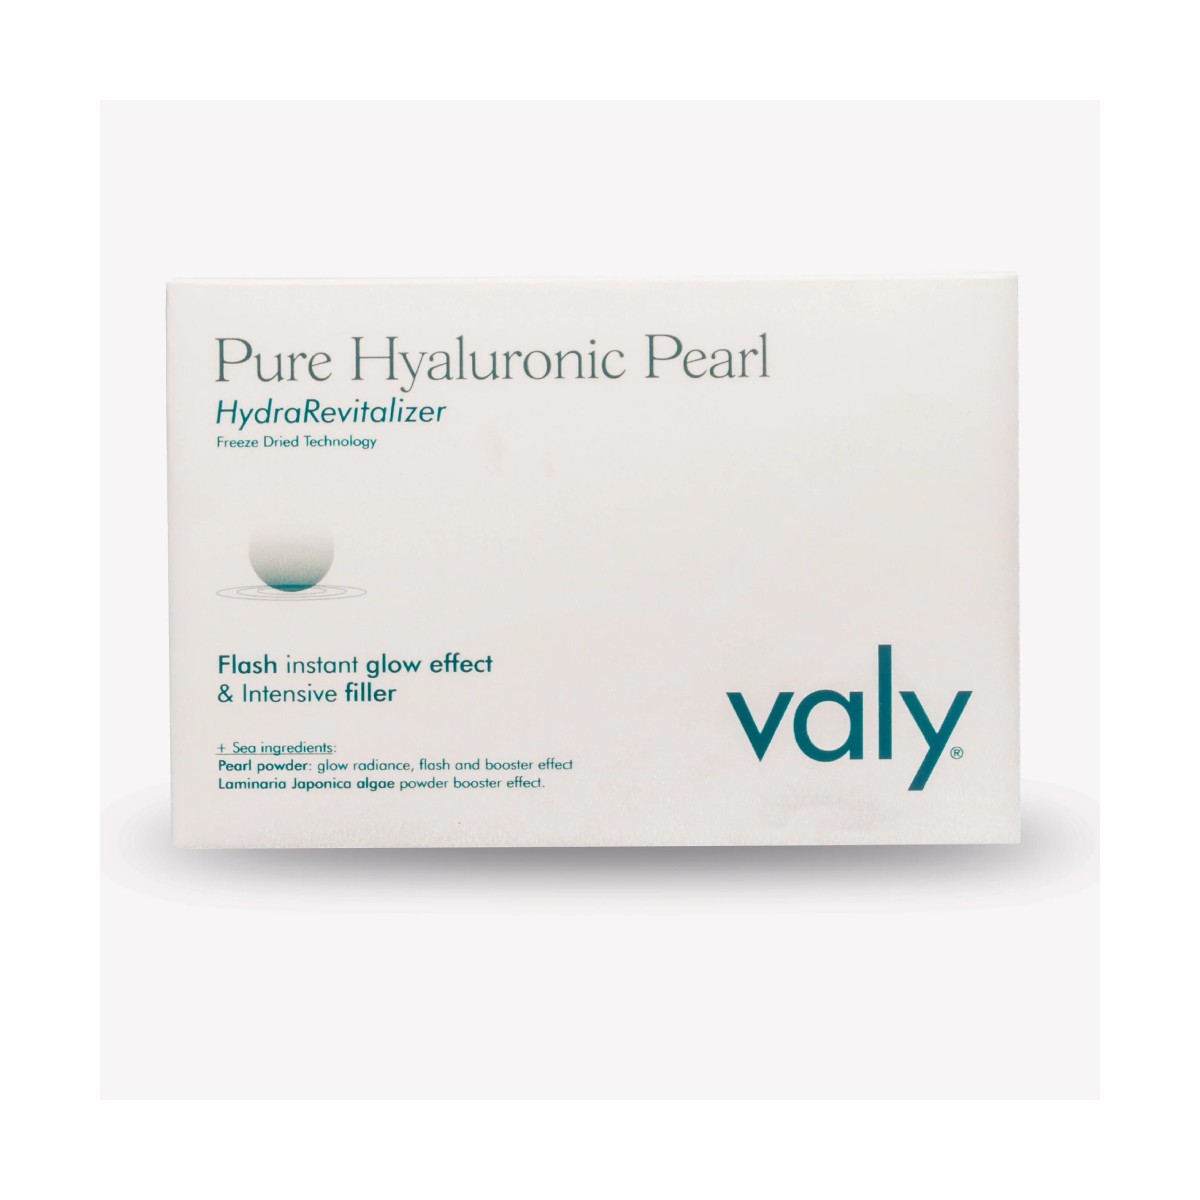 Pure Hyaluronic Pearl Valy